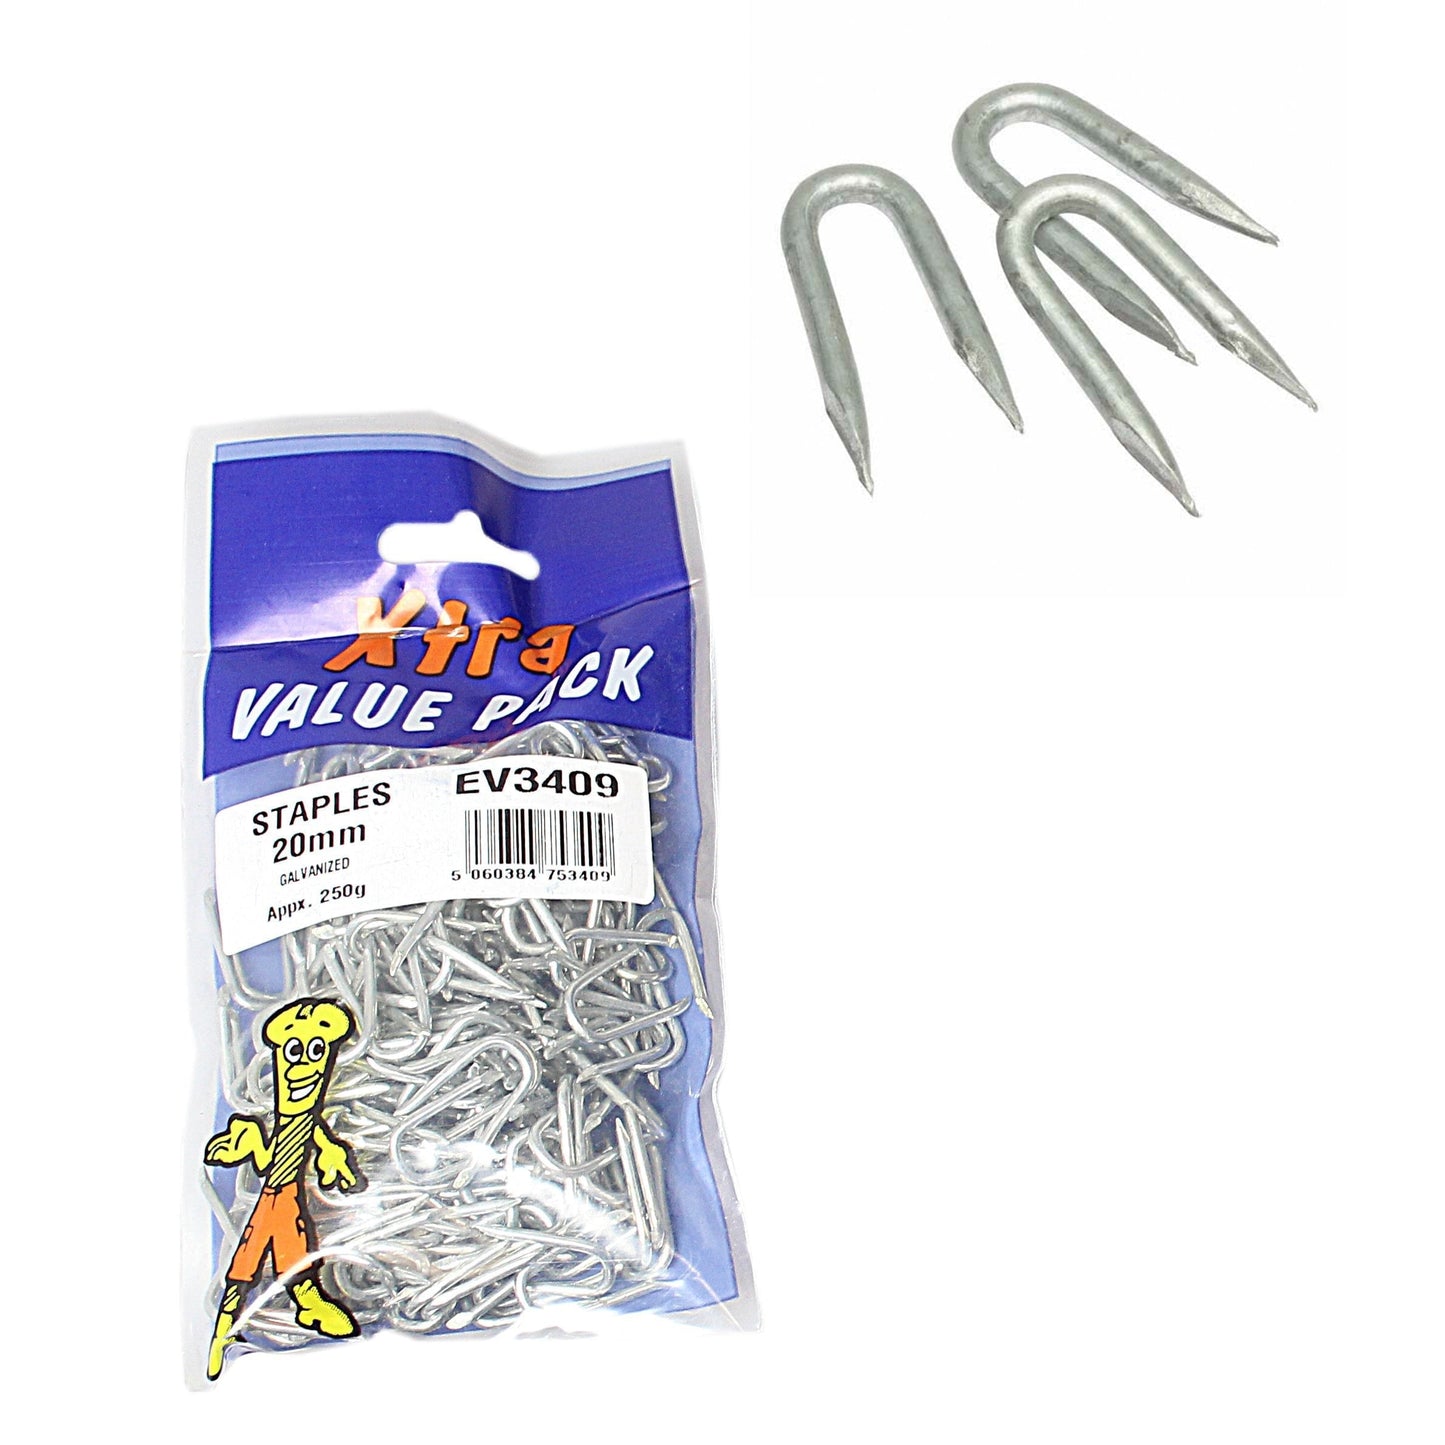 20mm Galvanised Staples Xtra Value Diy 53400 (Large Letter Rate)